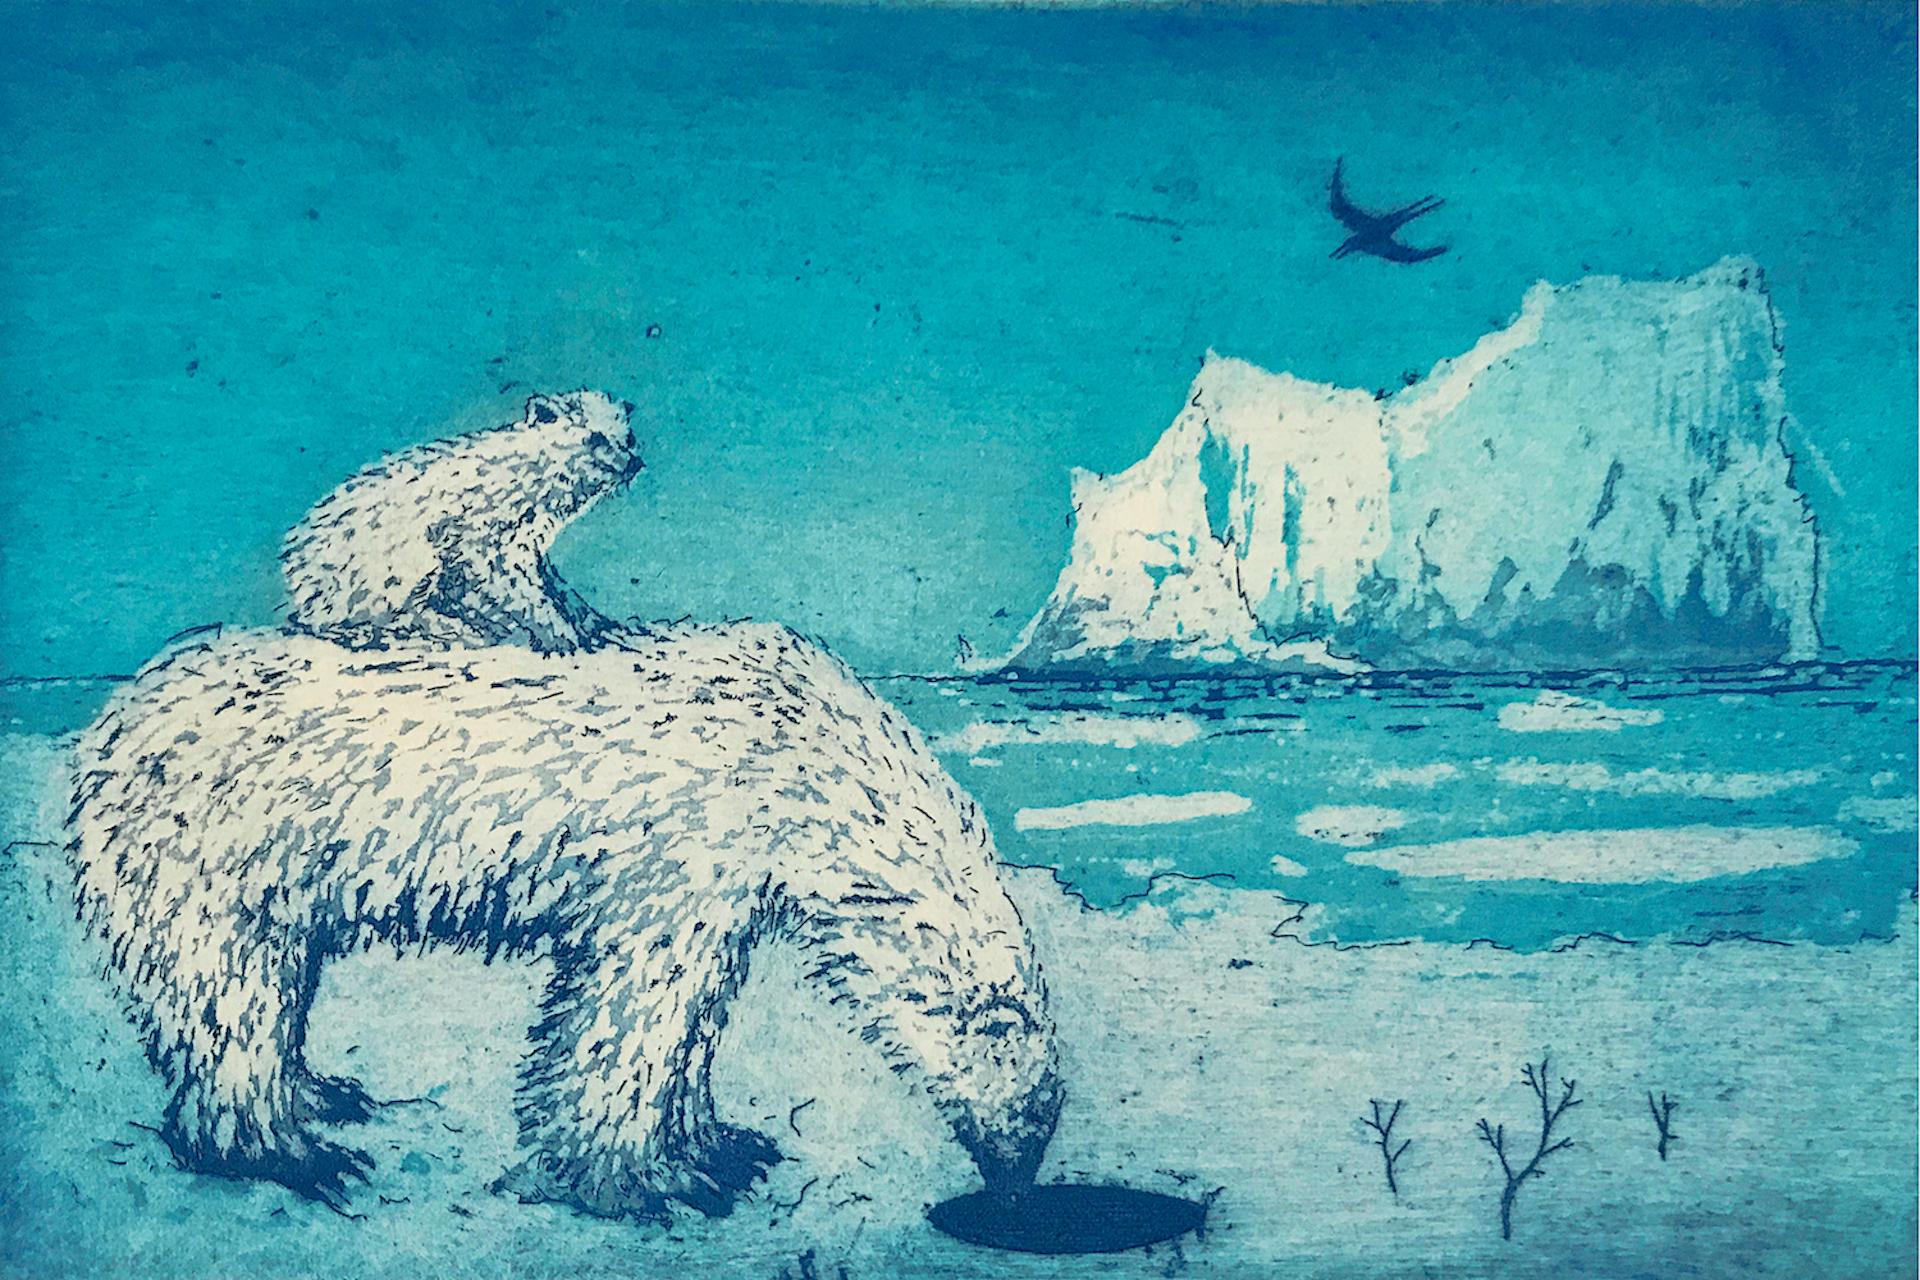 Tim Southall
A Hole in the Ice
Limited Edition Print
Size: H 10cm x W 15cm
Sold Unframed
(Please note that in situ images are purley an indication of how a piece may look).

‘A Hole in the Ice’ sees a polar bear peer curiously into an ice hole while